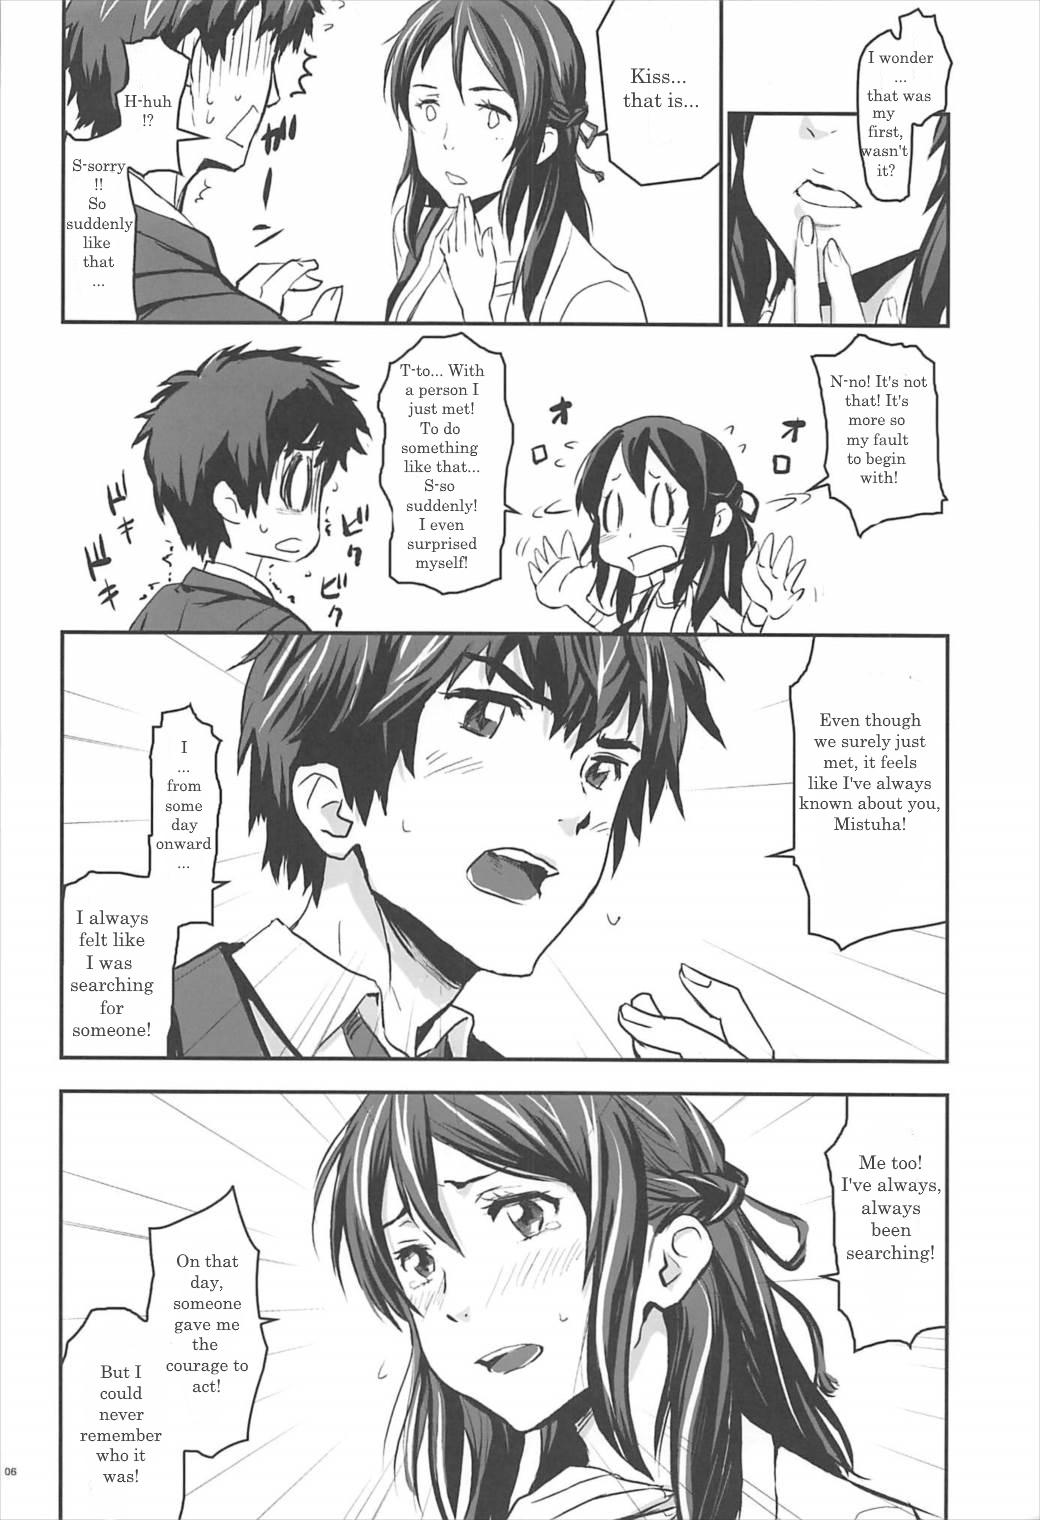 Whipping Your Inside - Kimi no na wa. Sister - Page 5